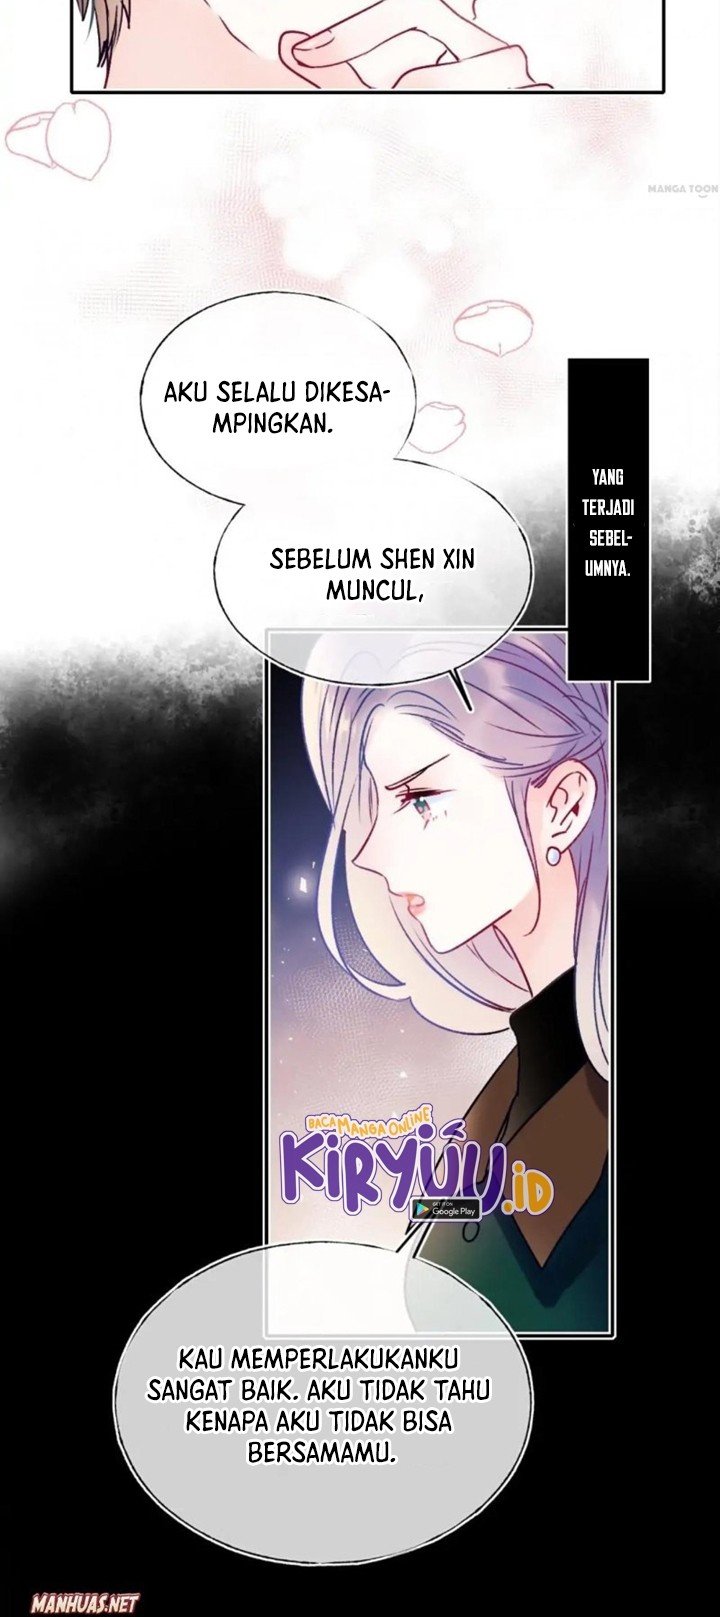 To be a Winner Chapter 102